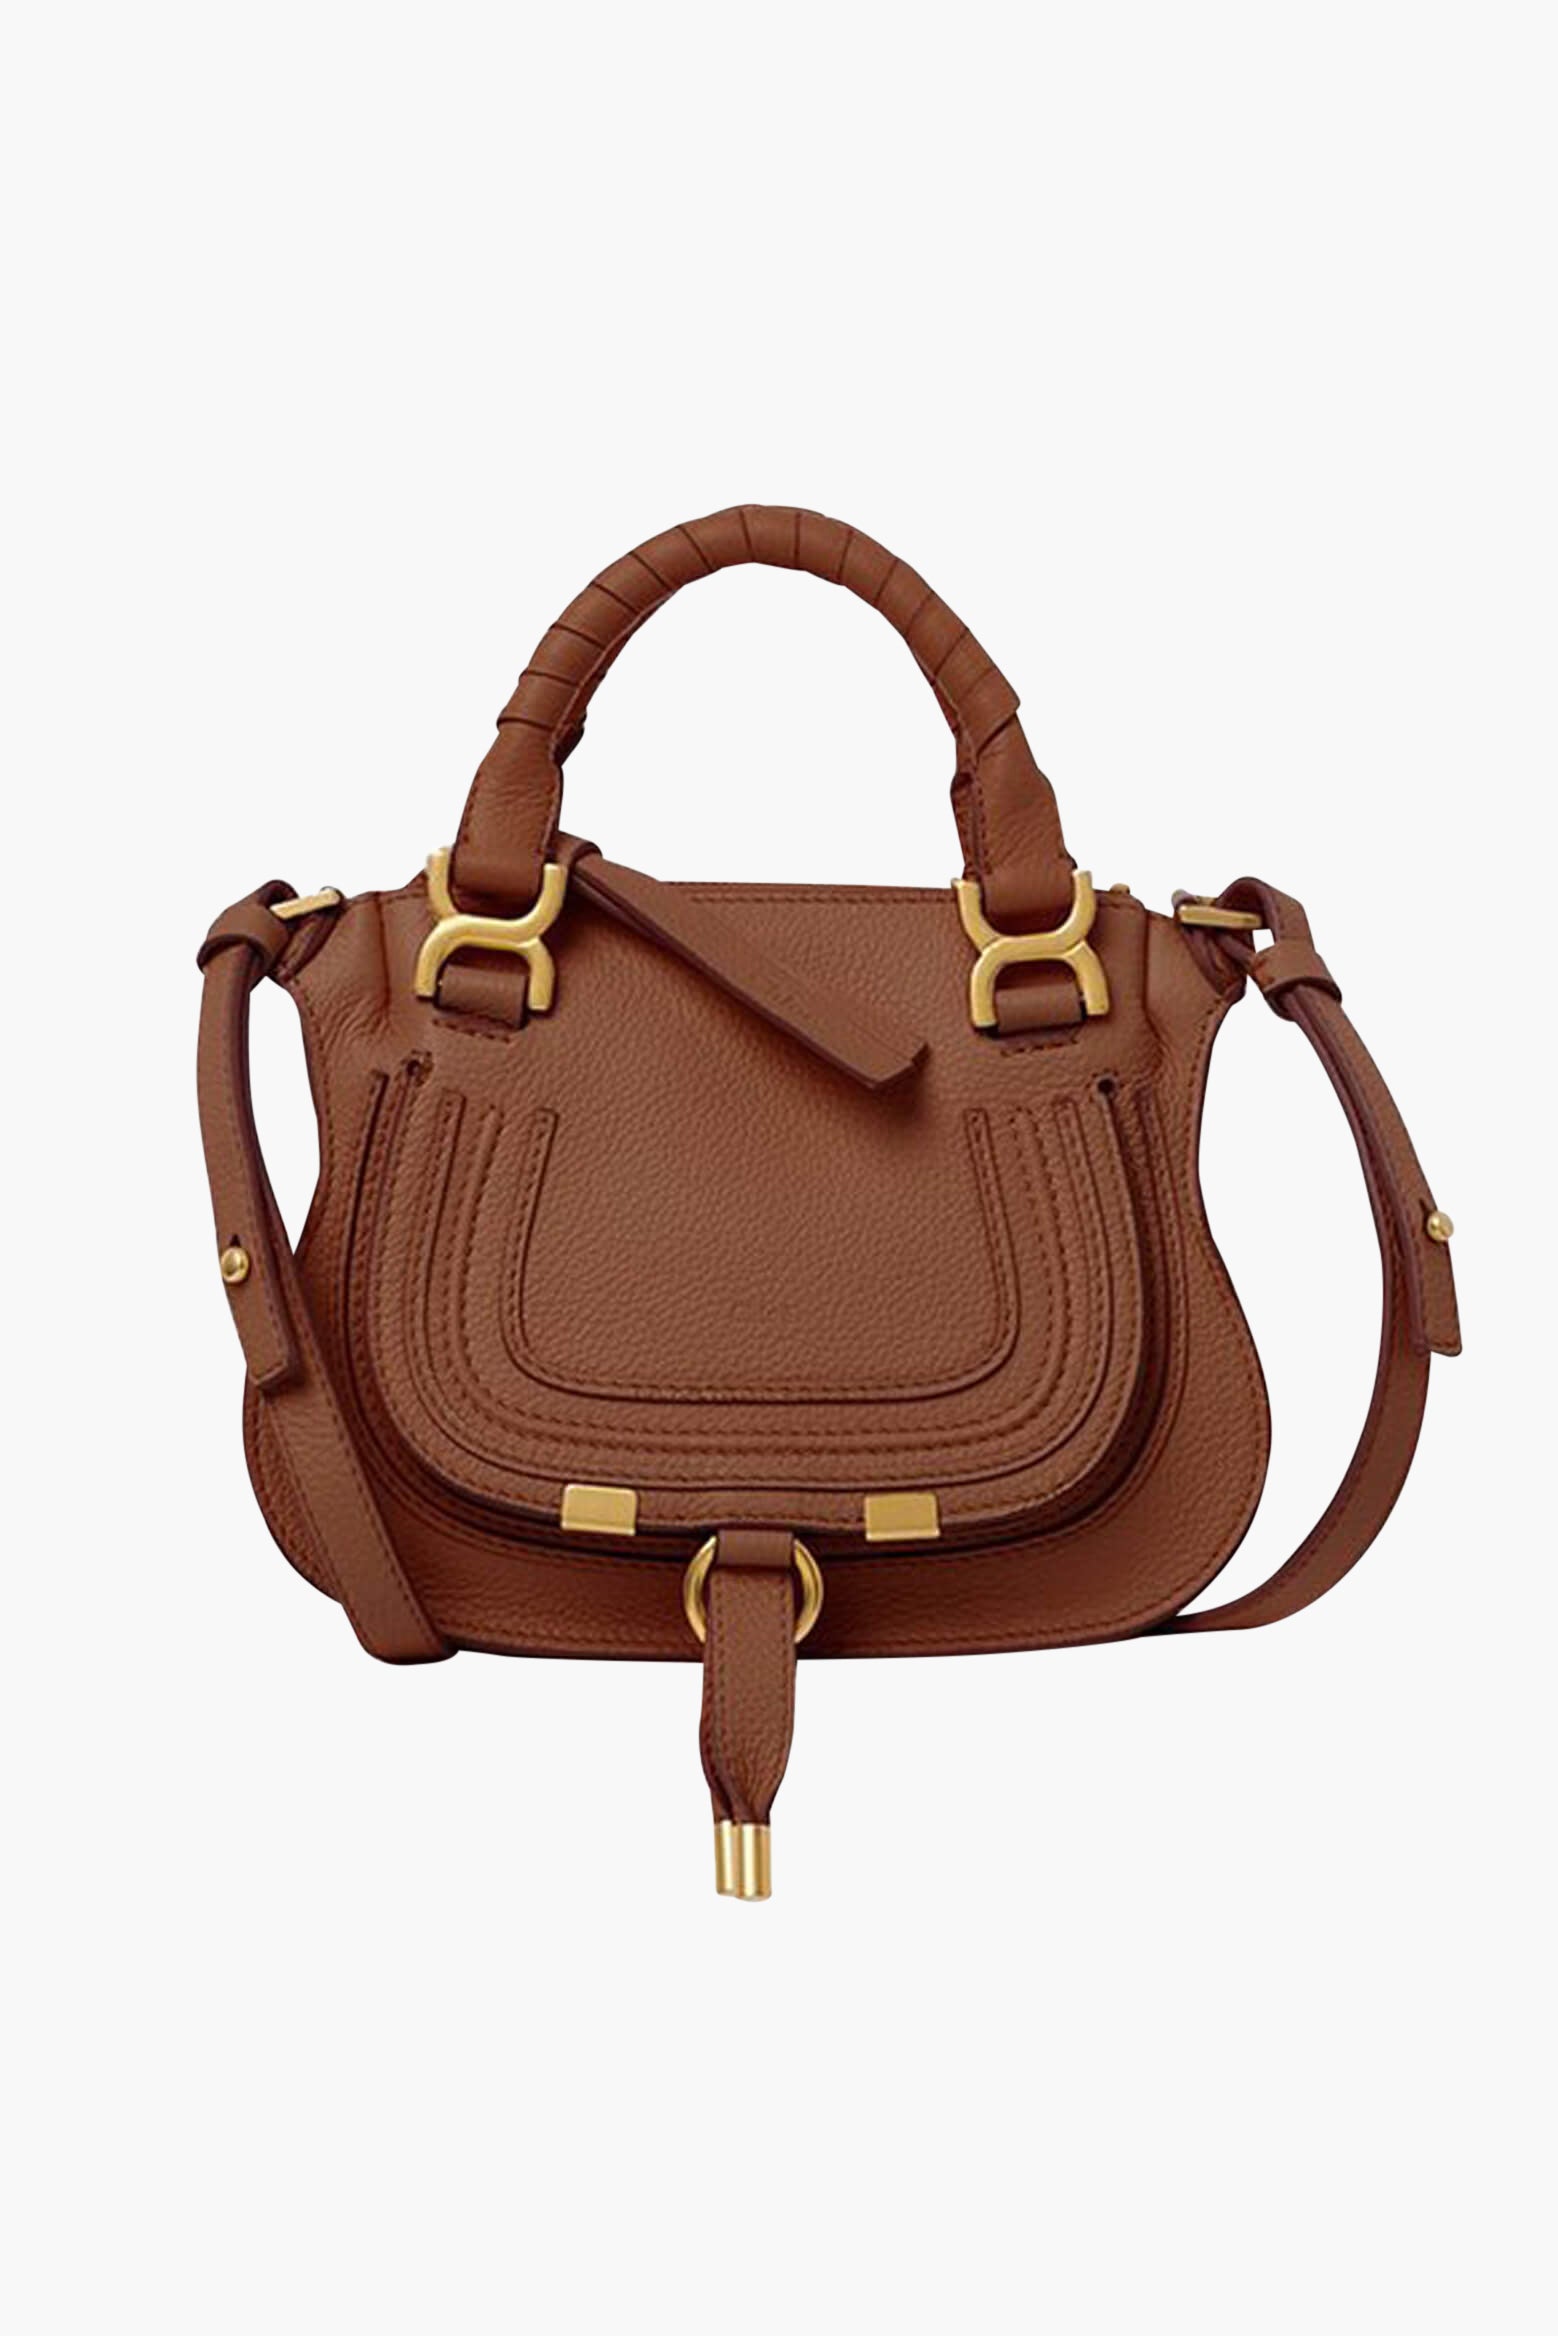 CHLOÉ Marcie Mini Double Carry Bag in Tan | The New Trend